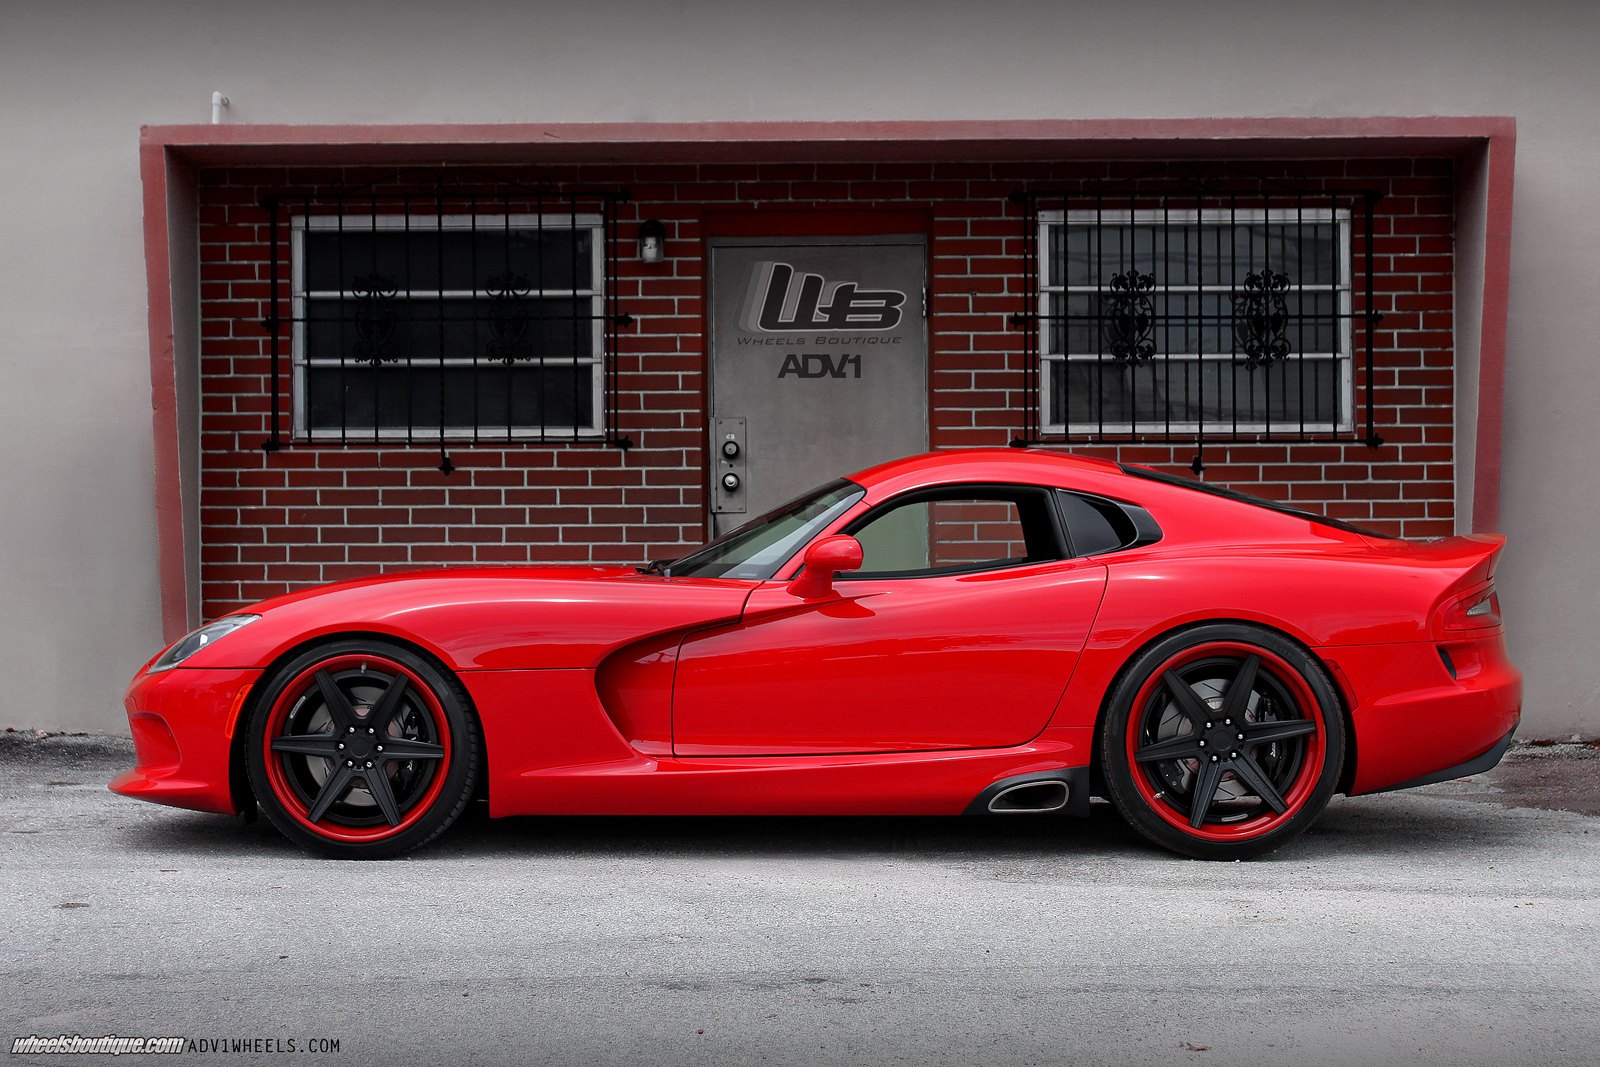 Red Dodge Viper with Aftermarket Side Skirts - Photo by ADV.1